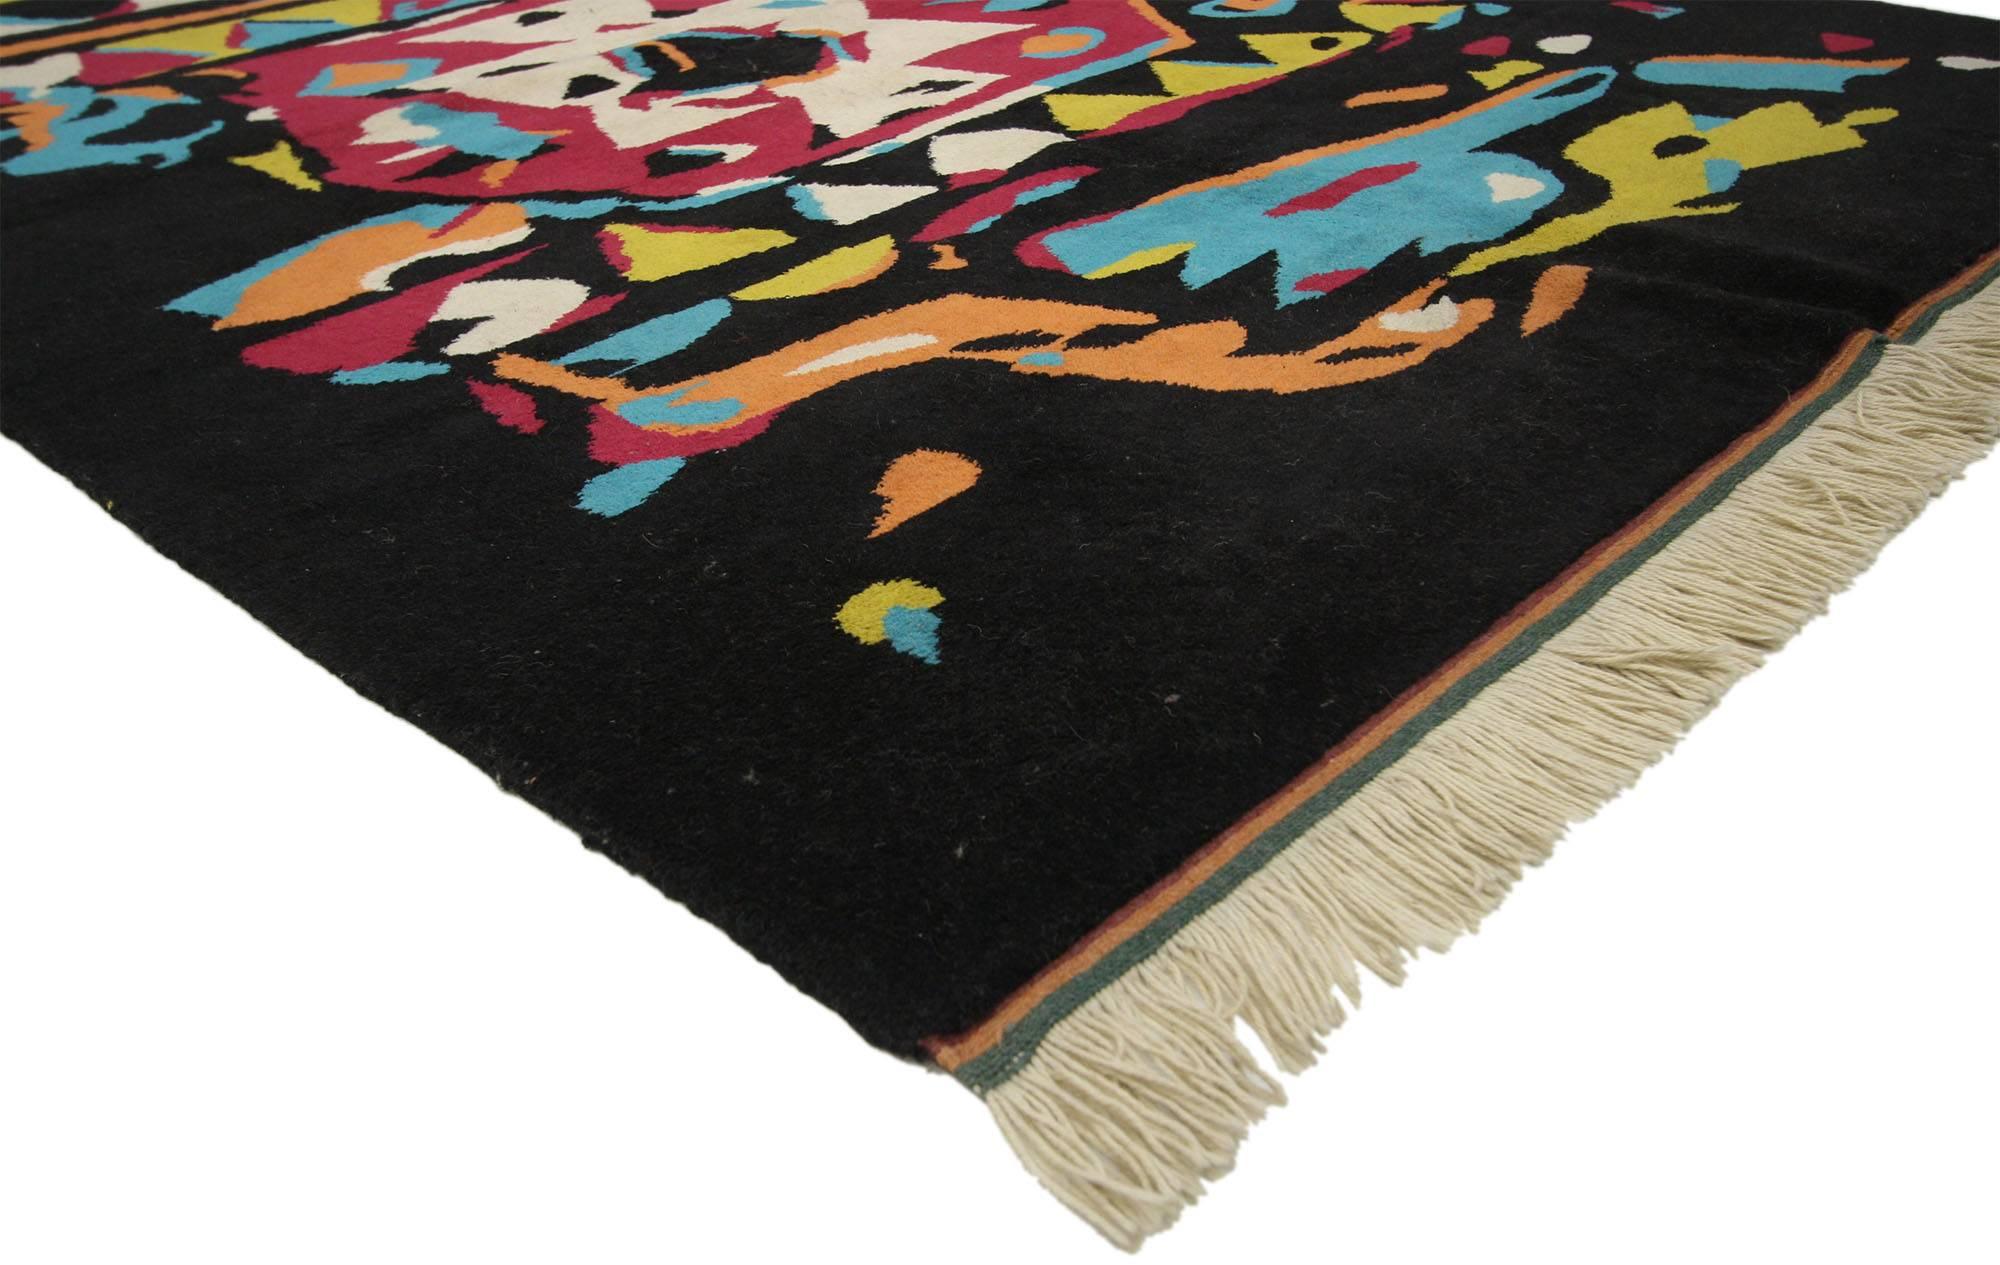 77136 vintage Turkish Oushak rug with Abstract Expressionist Postmodern style. This hand knotted wool vintage Turkish Oushak rug features an abstract expressionist and Post-modern style. Rendered in variegated shades of black, tangerine, aqua, ruby